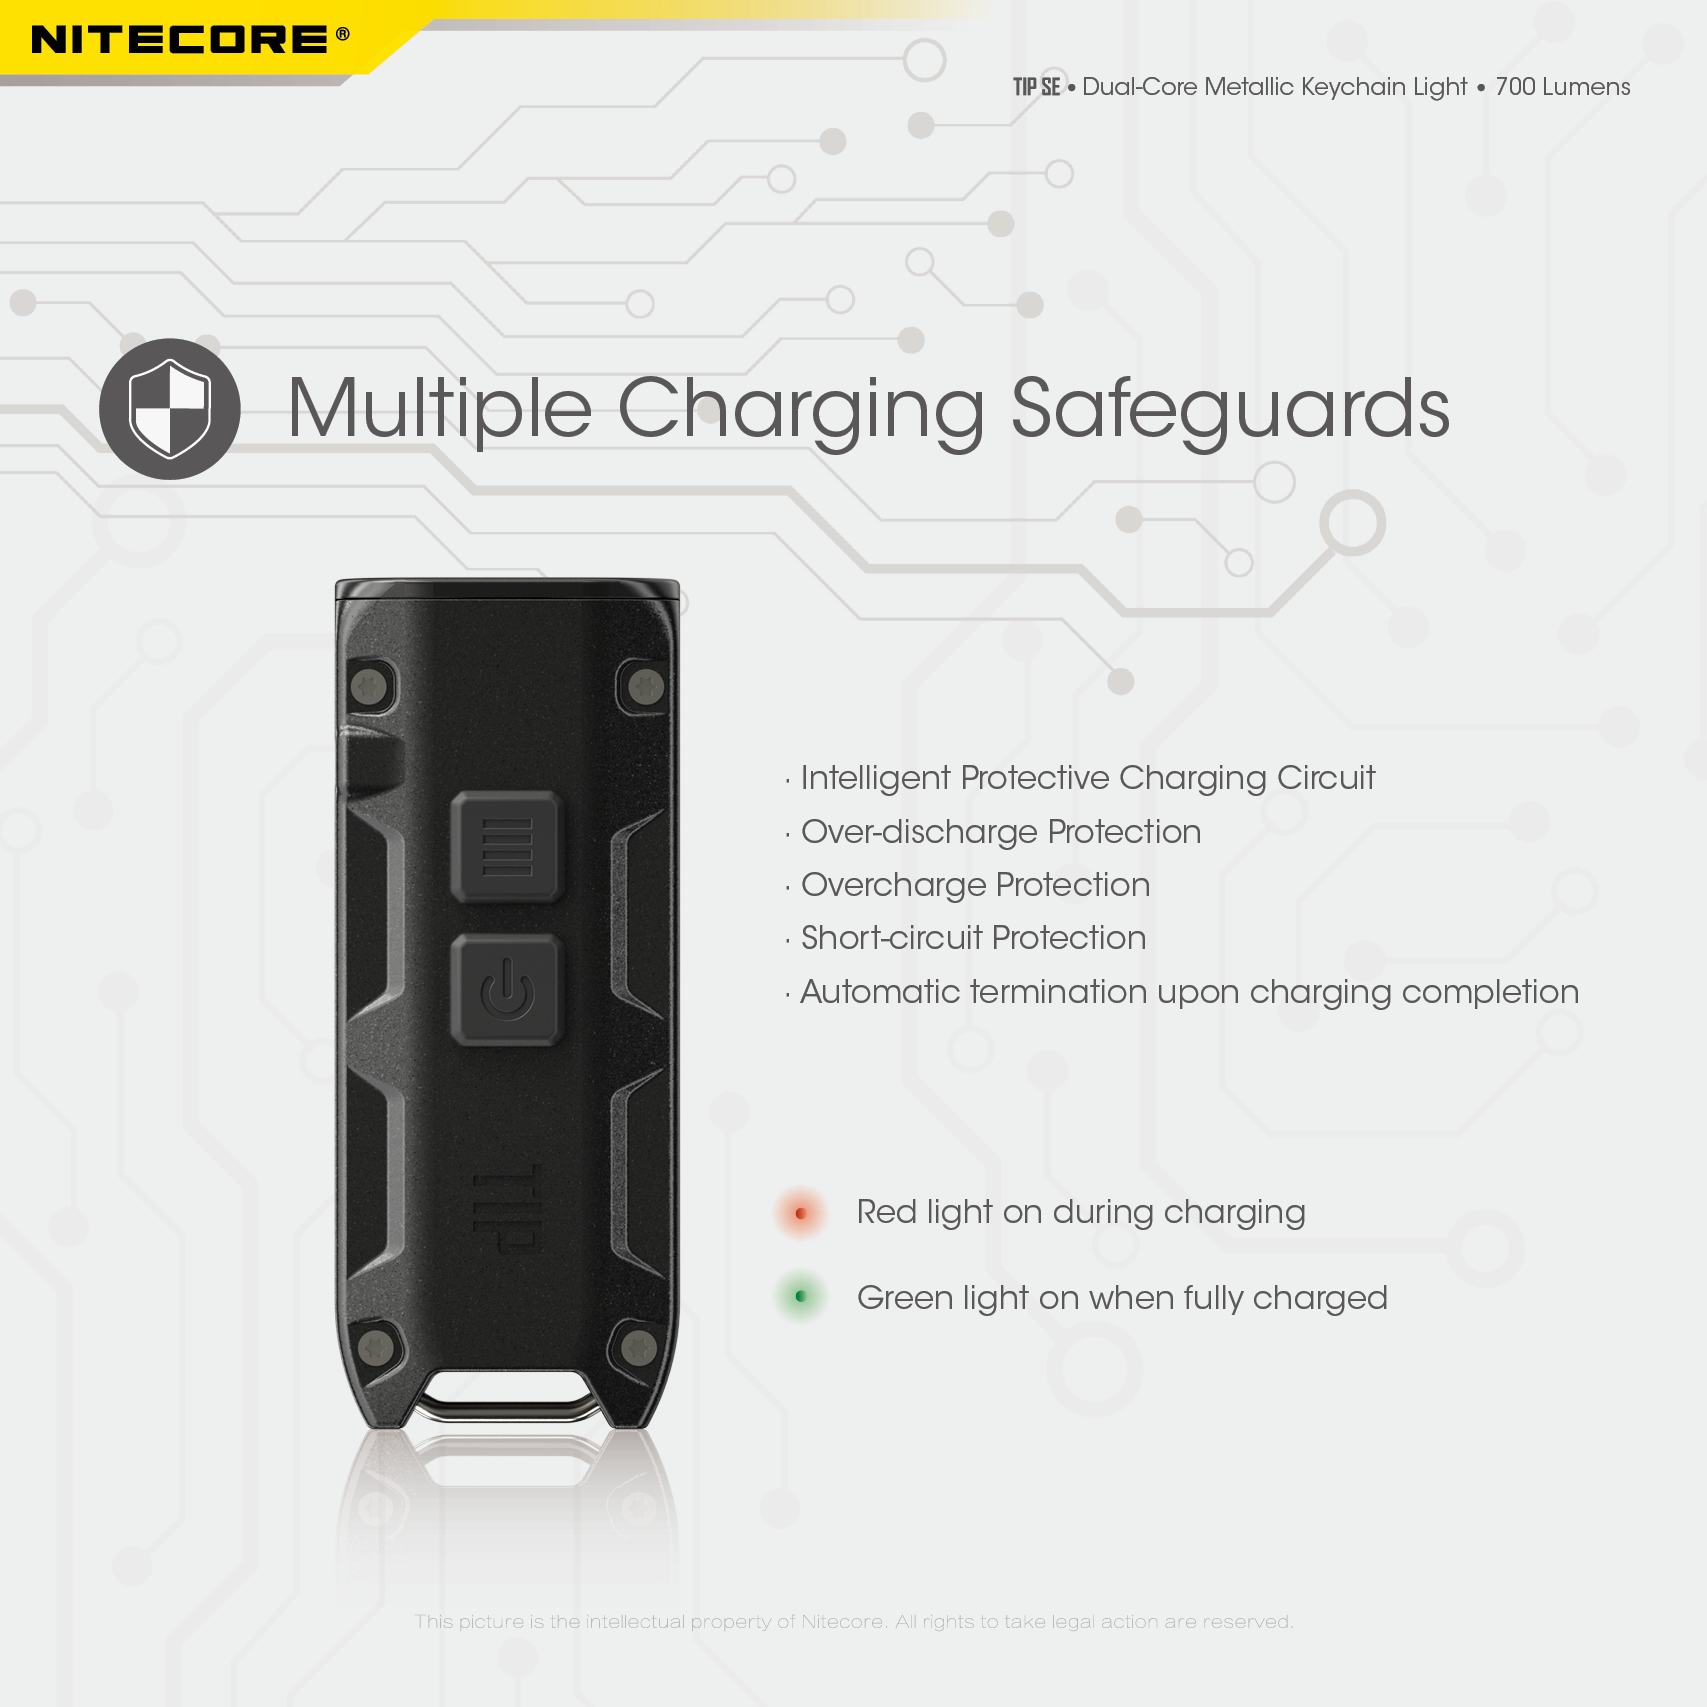 NITECORE TIP SE 700LM P8 Dual Light LED Keychain Flashlight Type-C Rechargeable QC Every Day Carry Mini Torch